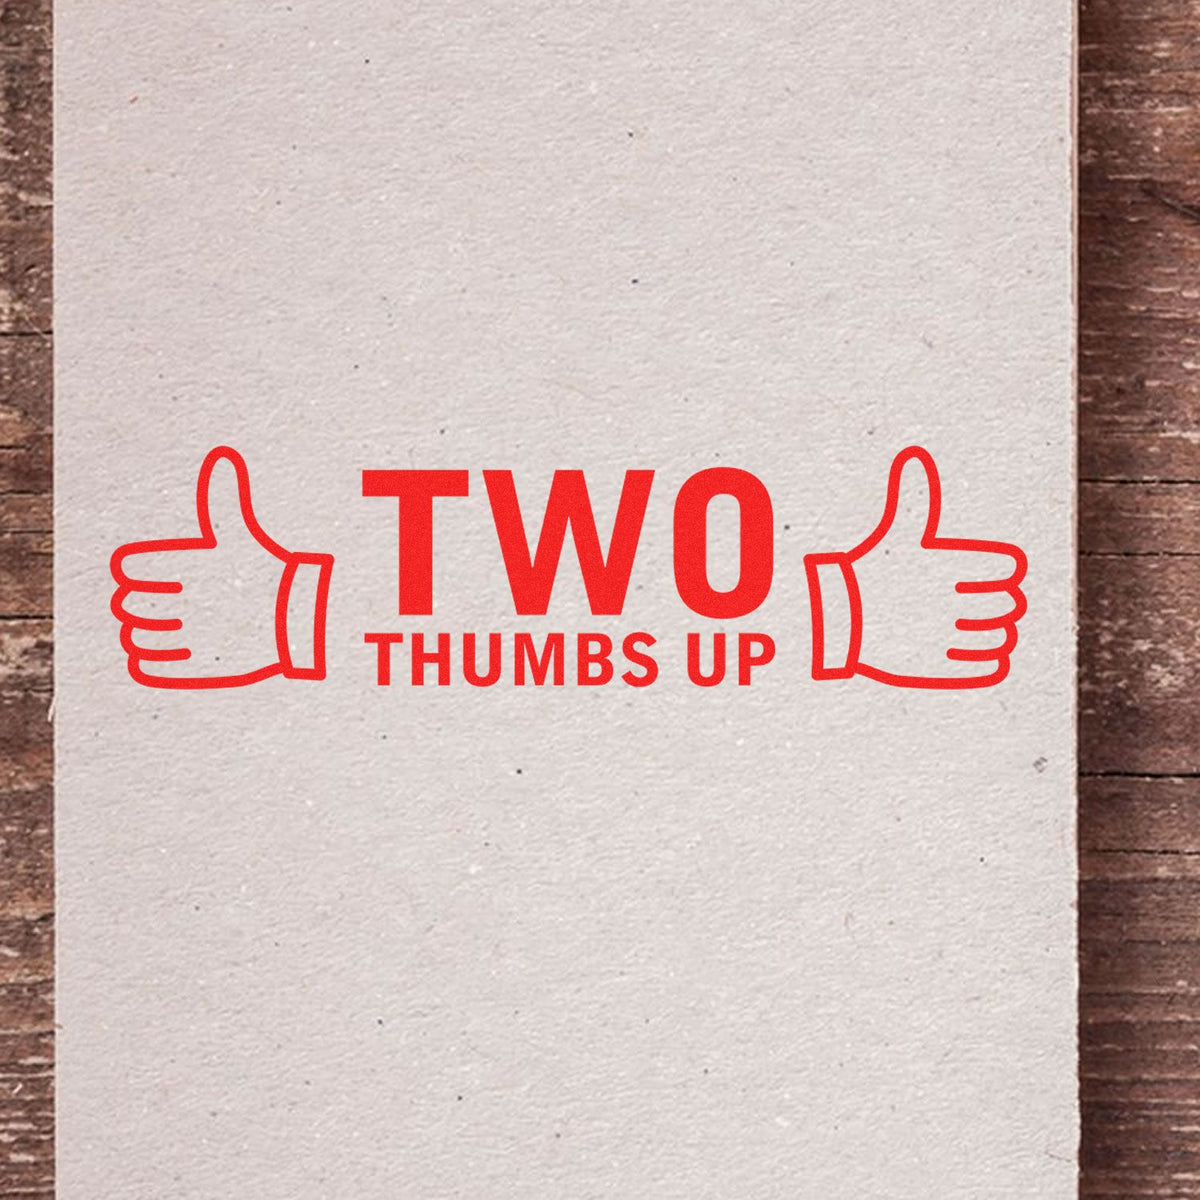 Large Two Thumbs Up with Thumb Icon Rubber Stamp In Use Photo